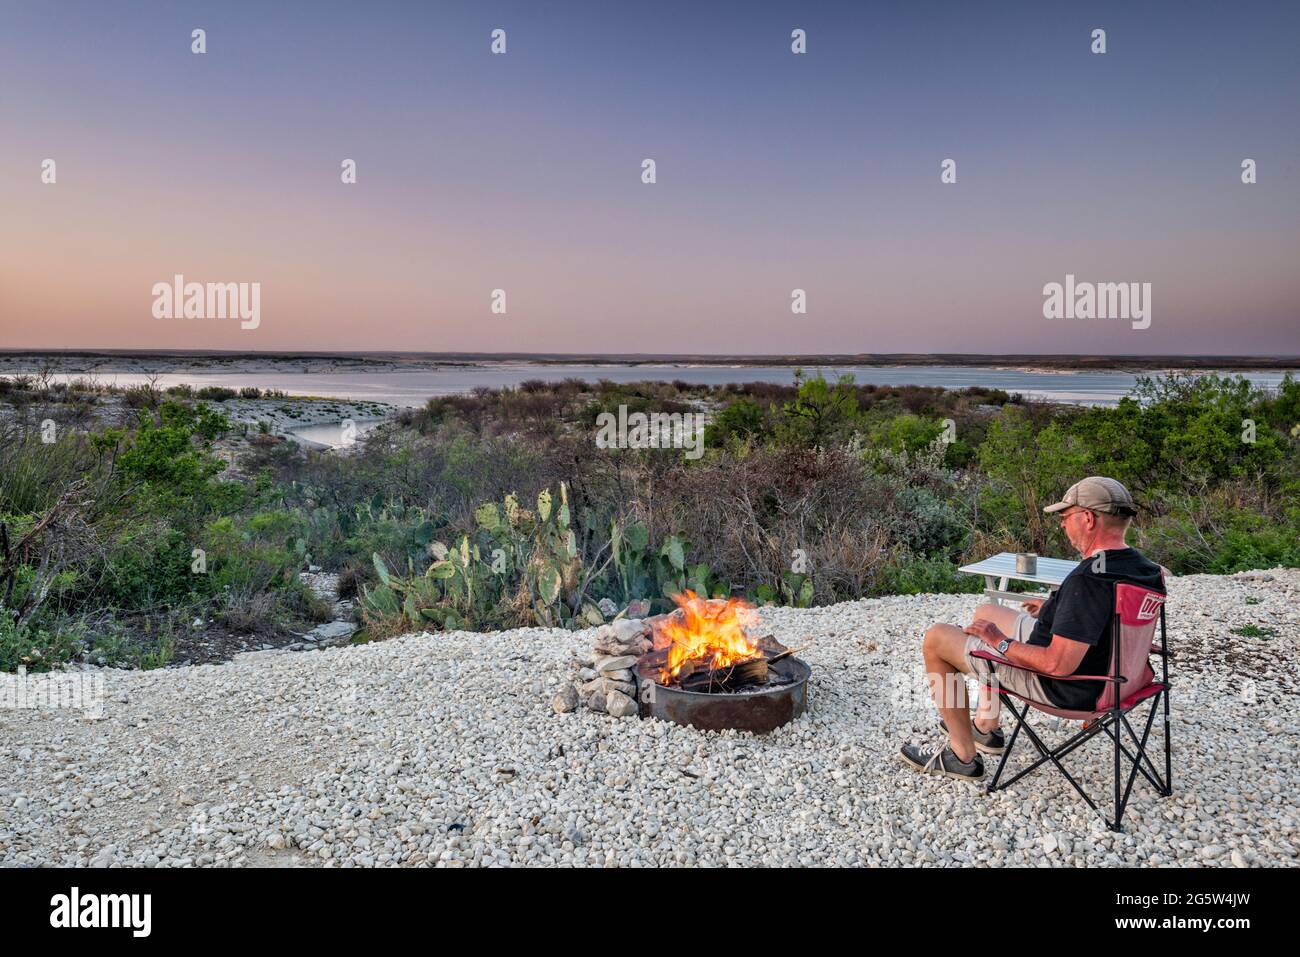 Camper sitting by fire, looking at Amistad Reservoir at sunset, Governors Landing campground, near Del Rio, Texas, USA Stock Photo